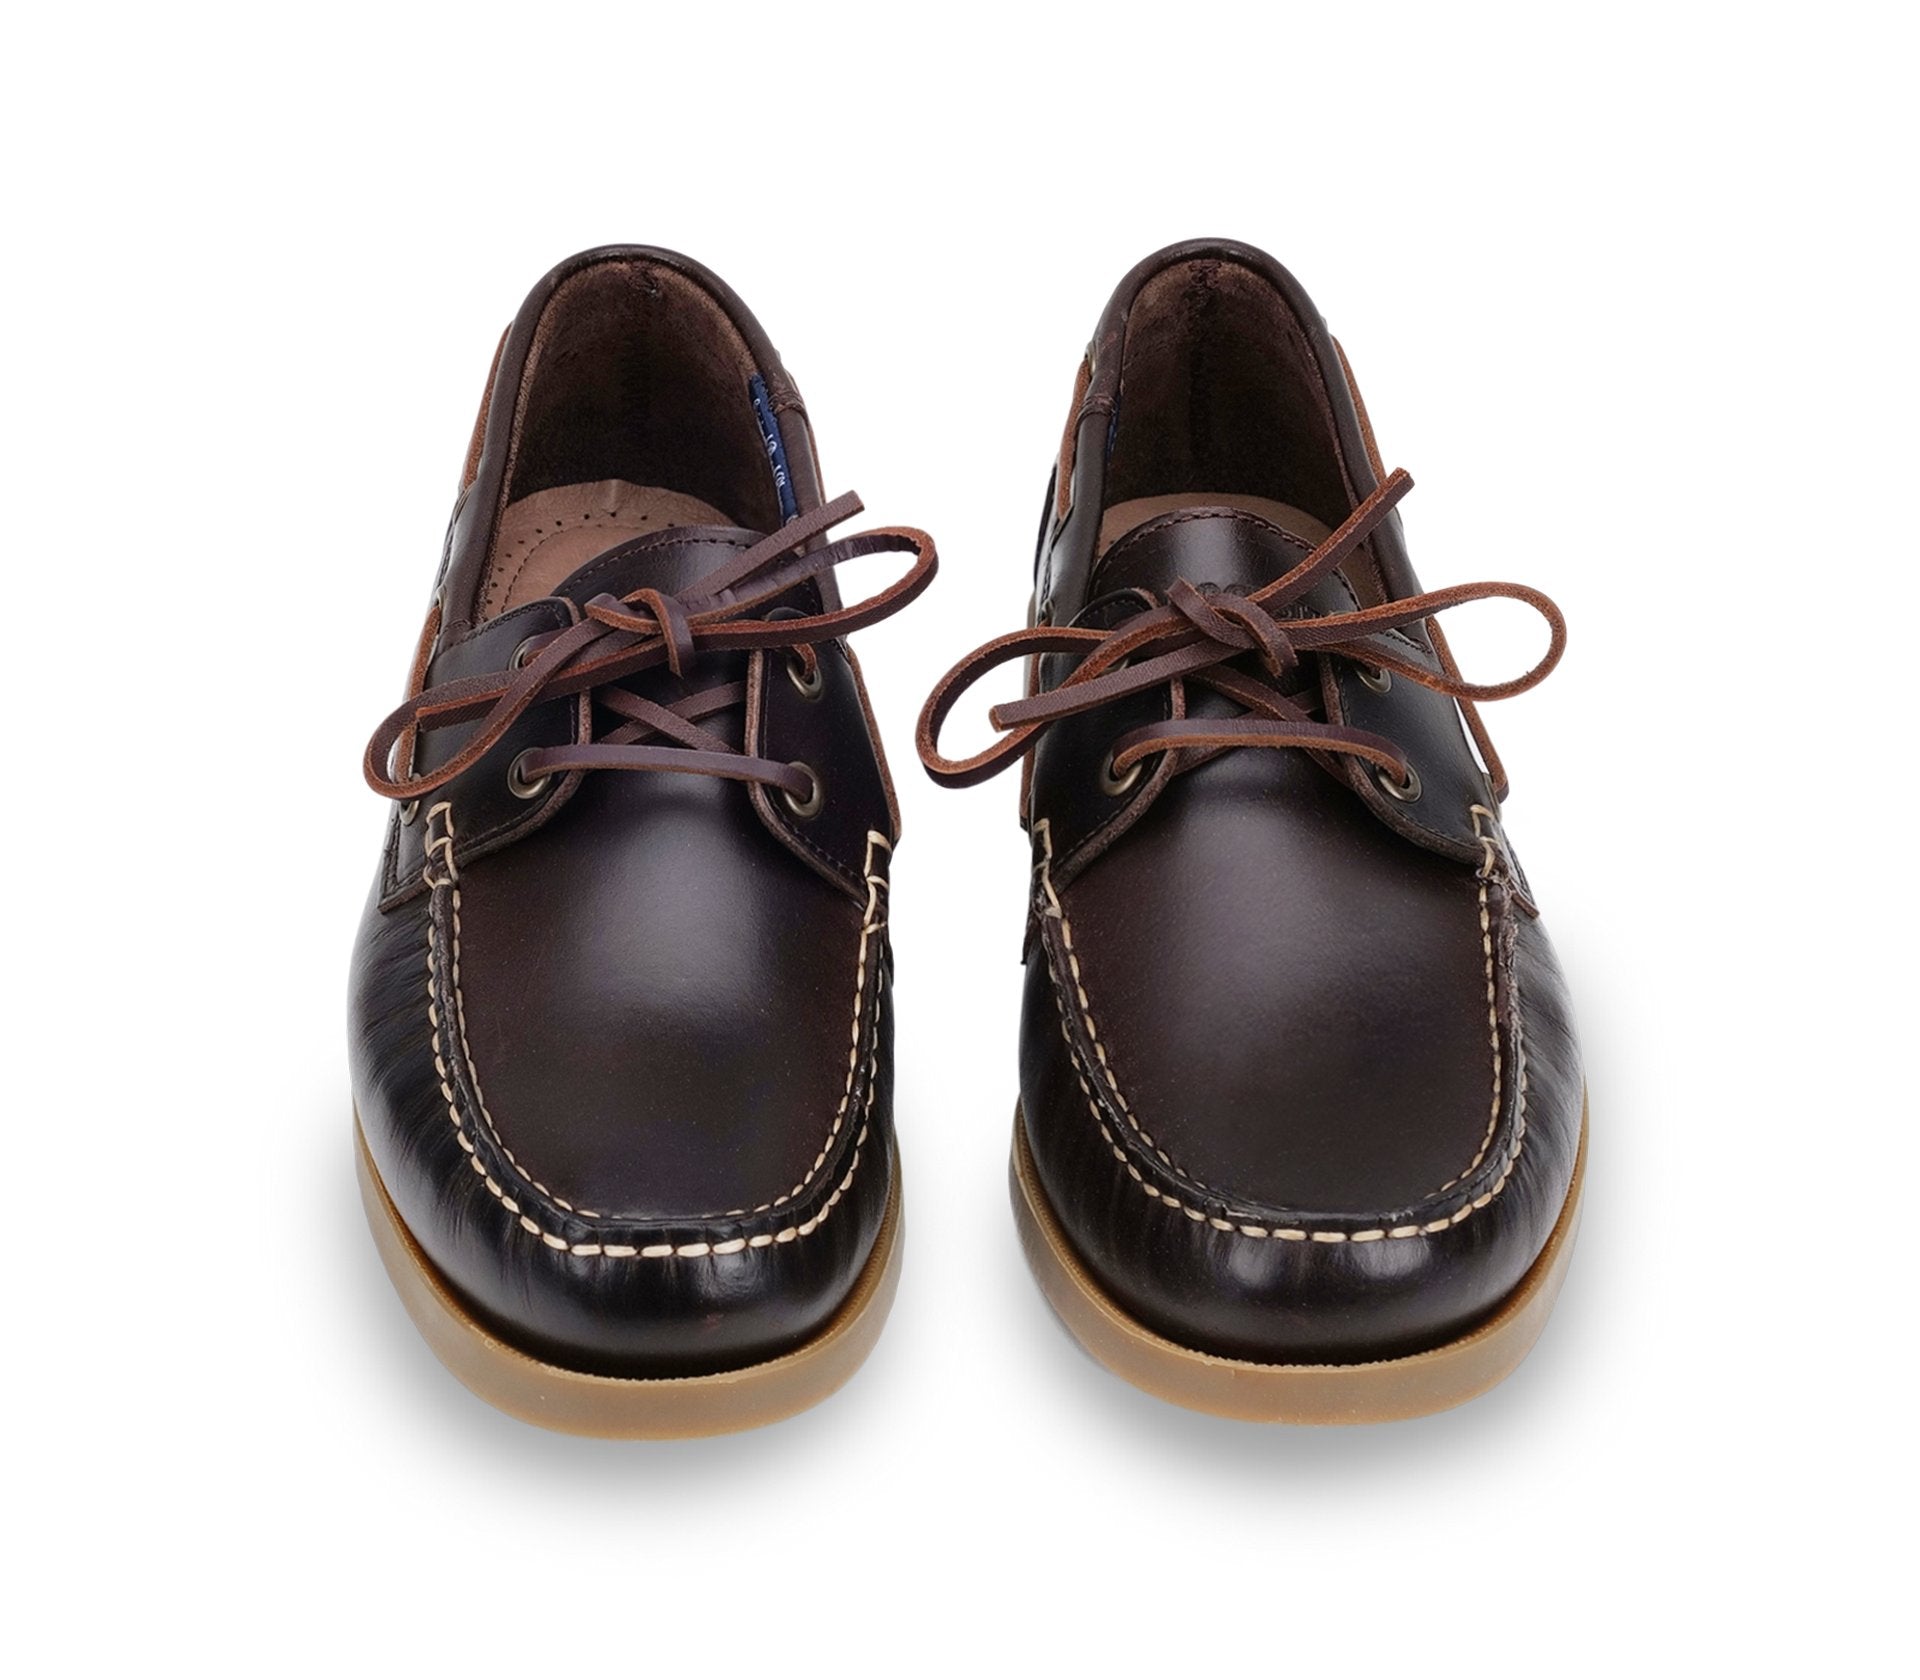 Men's Tone on Tone Laced Boat Shoes